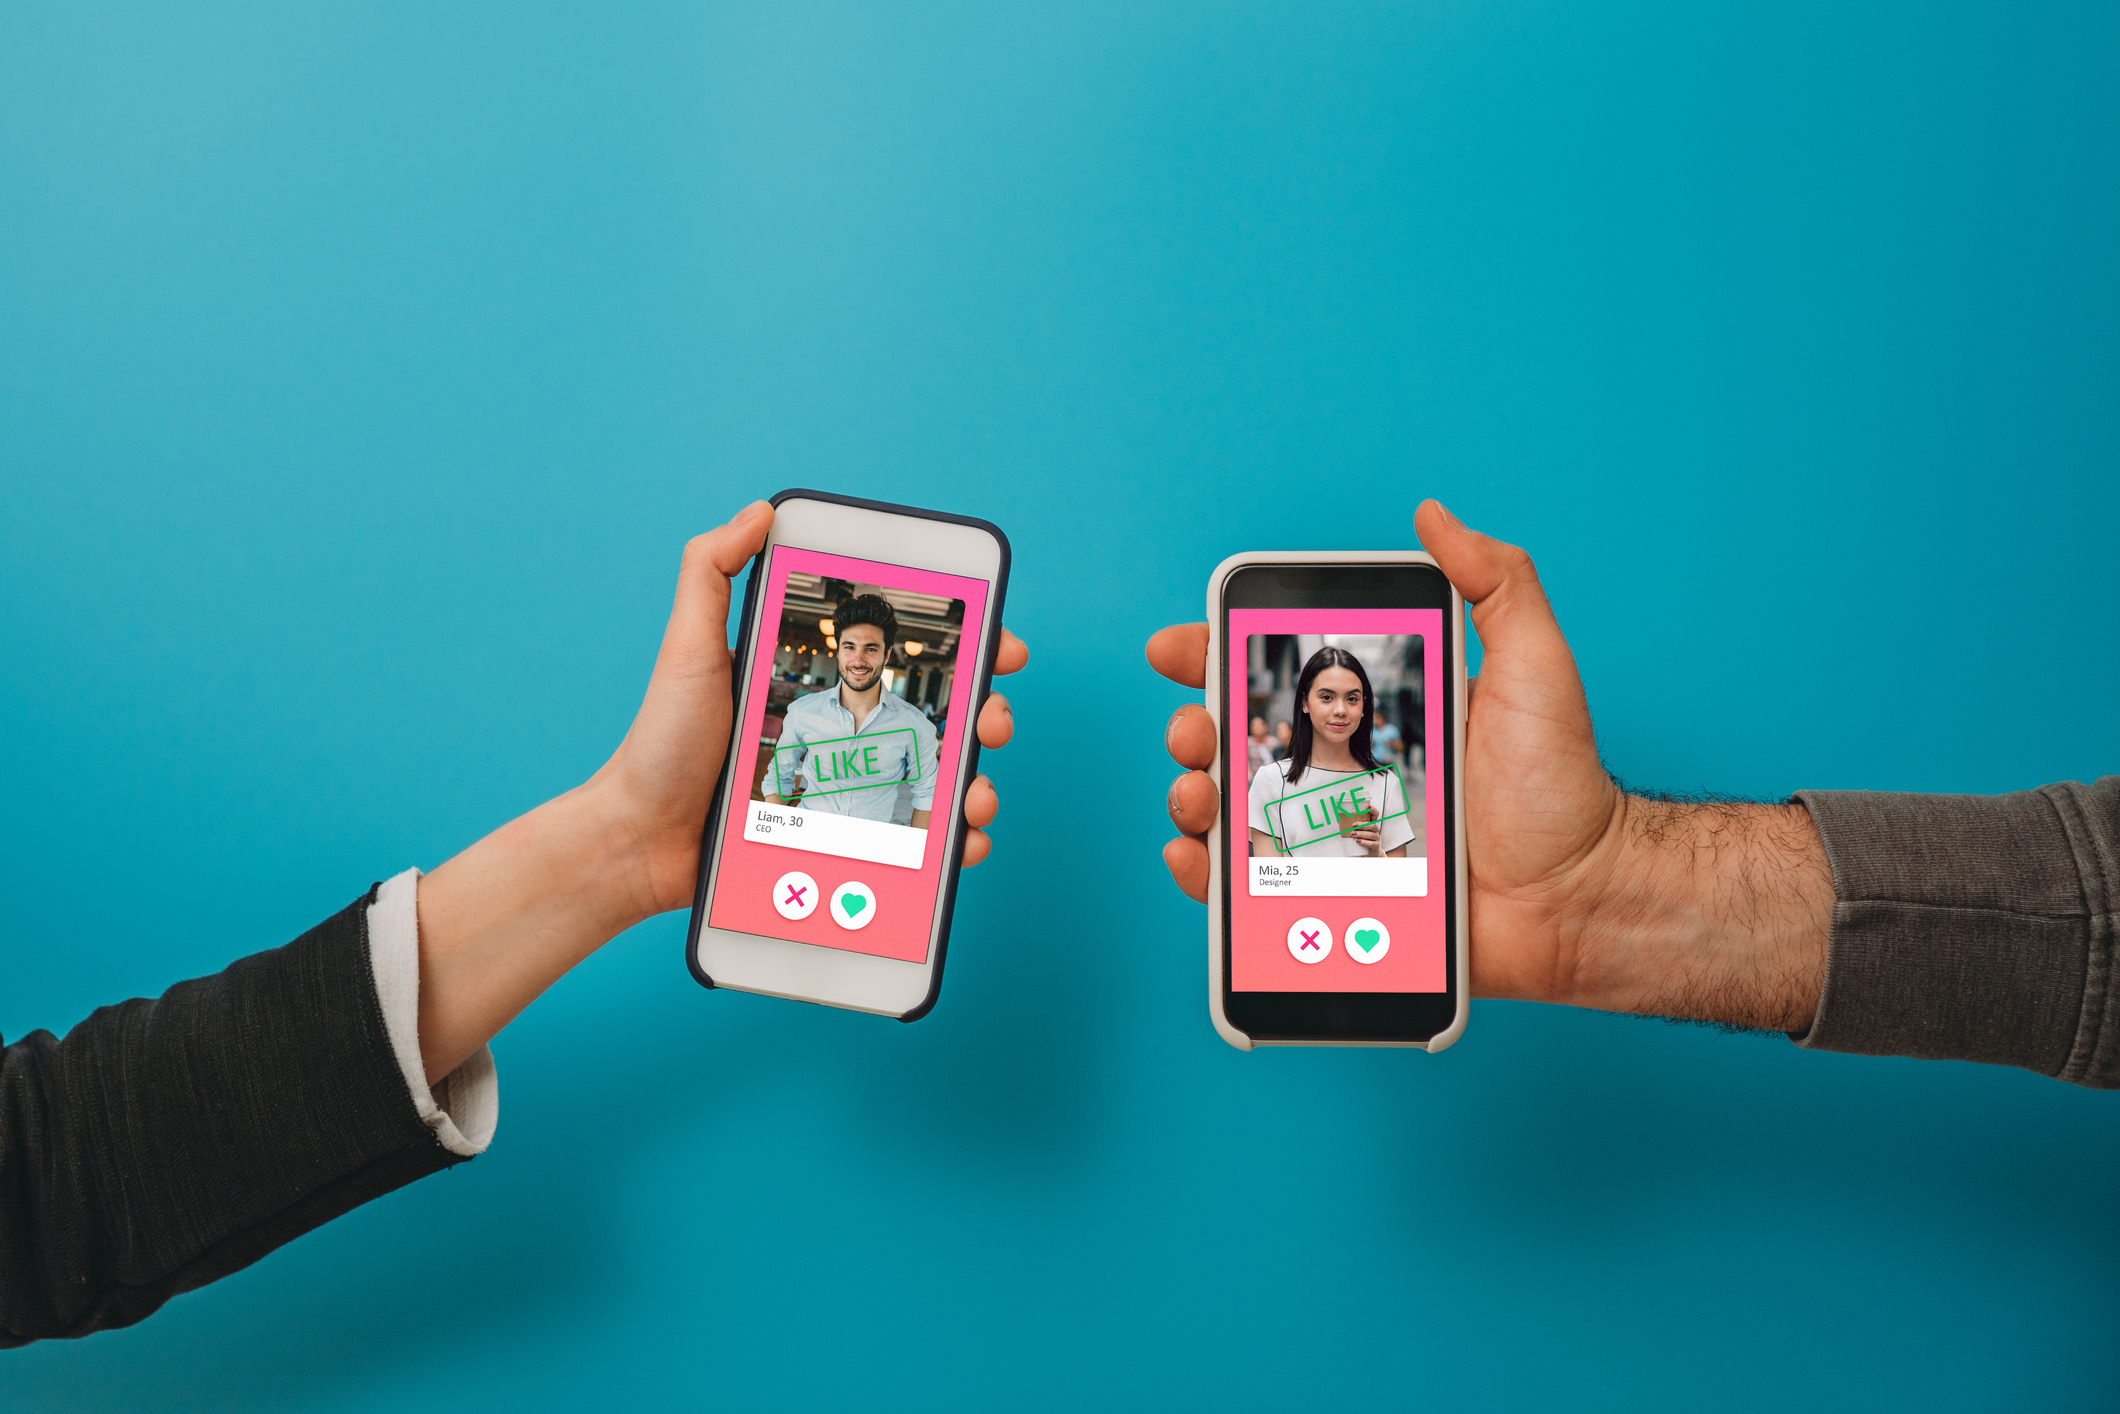 conceptual image of two hands holding smart phones with an online dating app on the screen